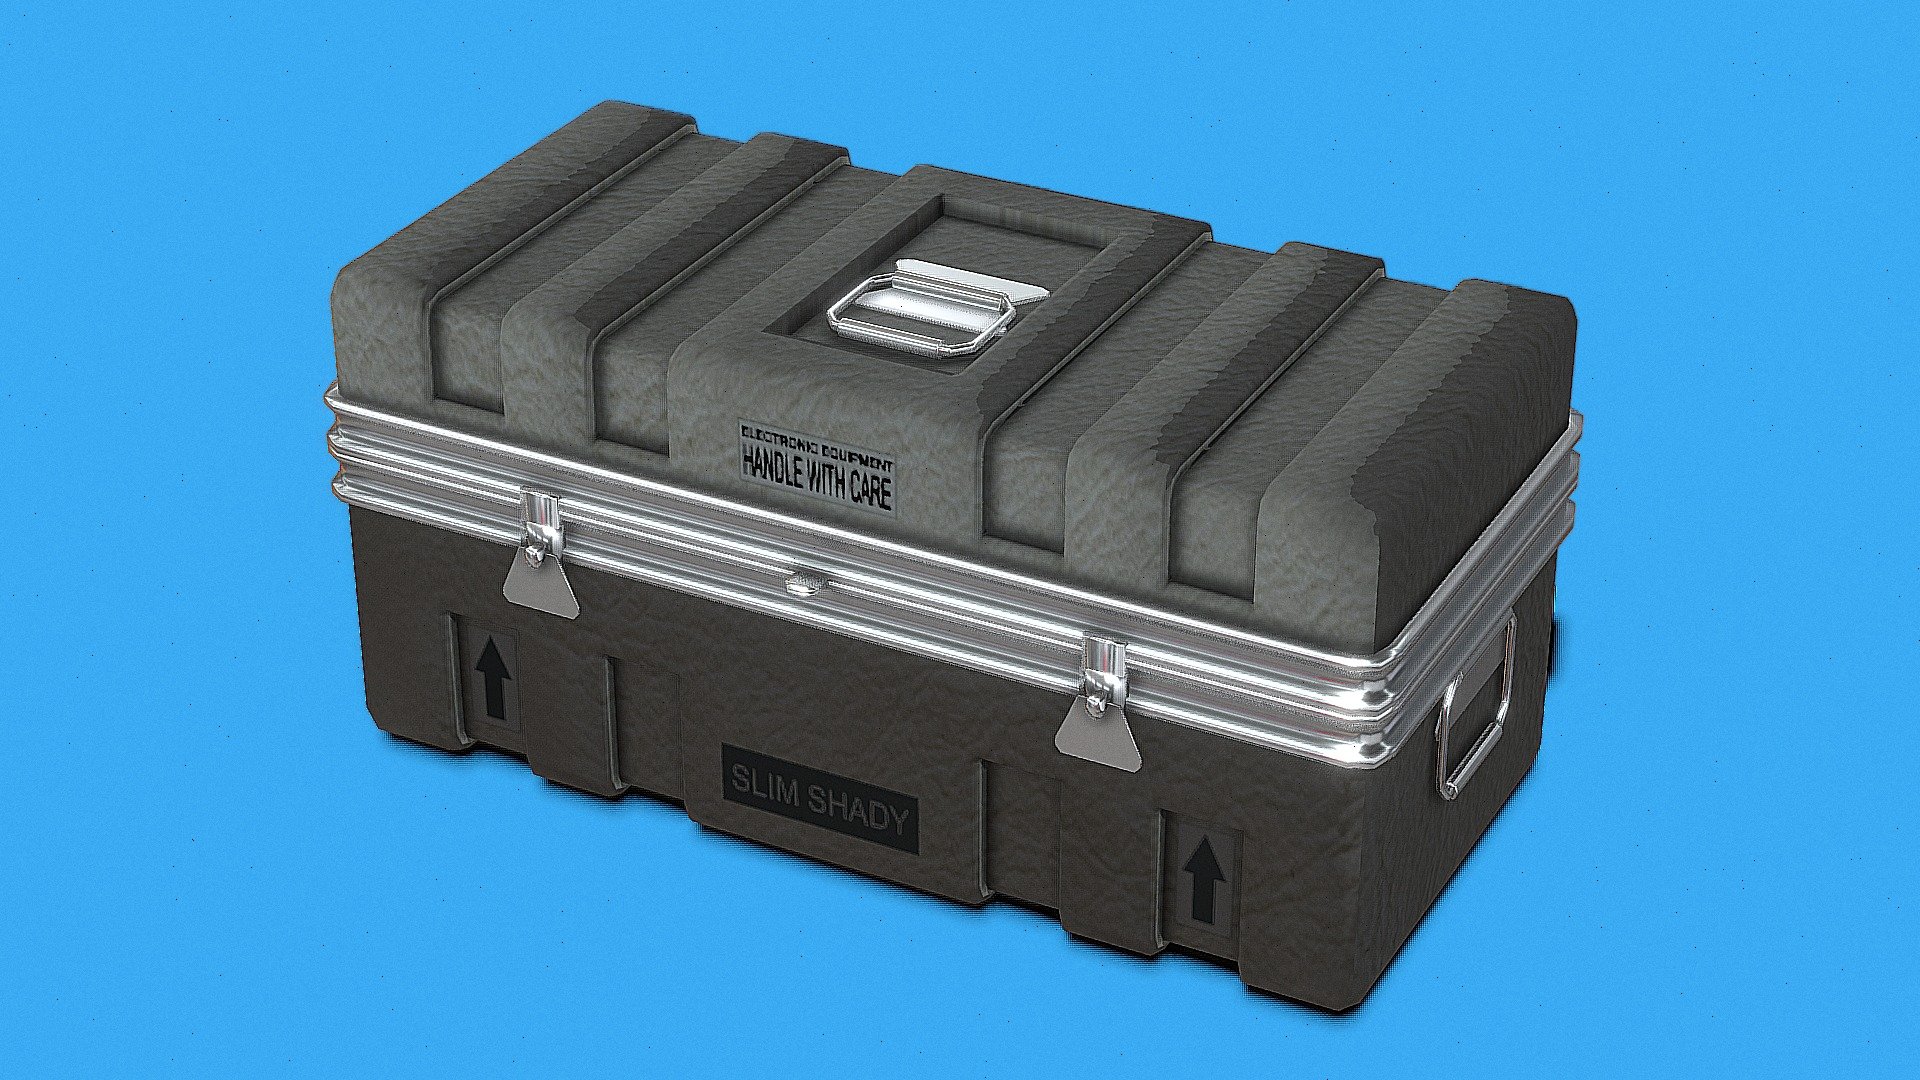 Introducing our rugged Military Storage Boxes - the ultimate solution for secure and waterproof storage needs. Crafted from durable materials, these containers ensure your gear stays protected in any environment. From field operations to camping trips, trust our storage boxes to safeguard your essentials. Order now and receive a special promo offer! Don't compromise on quality, choose reliability with our Military Storage Boxes today.

Gear up with our Military Storage Boxes – the pinnacle of durability and waterproof protection. Engineered to withstand the harshest conditions, these containers keep your equipment safe and dry in any scenario. Whether you're on the move or stationed in the field, our boxes offer unparalleled security for your gear. Take advantage of our limited-time promo and ensure your belongings stay secure wherever duty calls. Order now and experience the ultimate peace of mind with our Military Storage Boxes - Military Storage Box Waterproof Container - Download Free 3D model by 𝕽𝖊𝖆𝖑 𝕾𝖑𝖎𝖒 𝕾𝖍𝖆𝖉𝖞 (@real_slimshady) 3d model